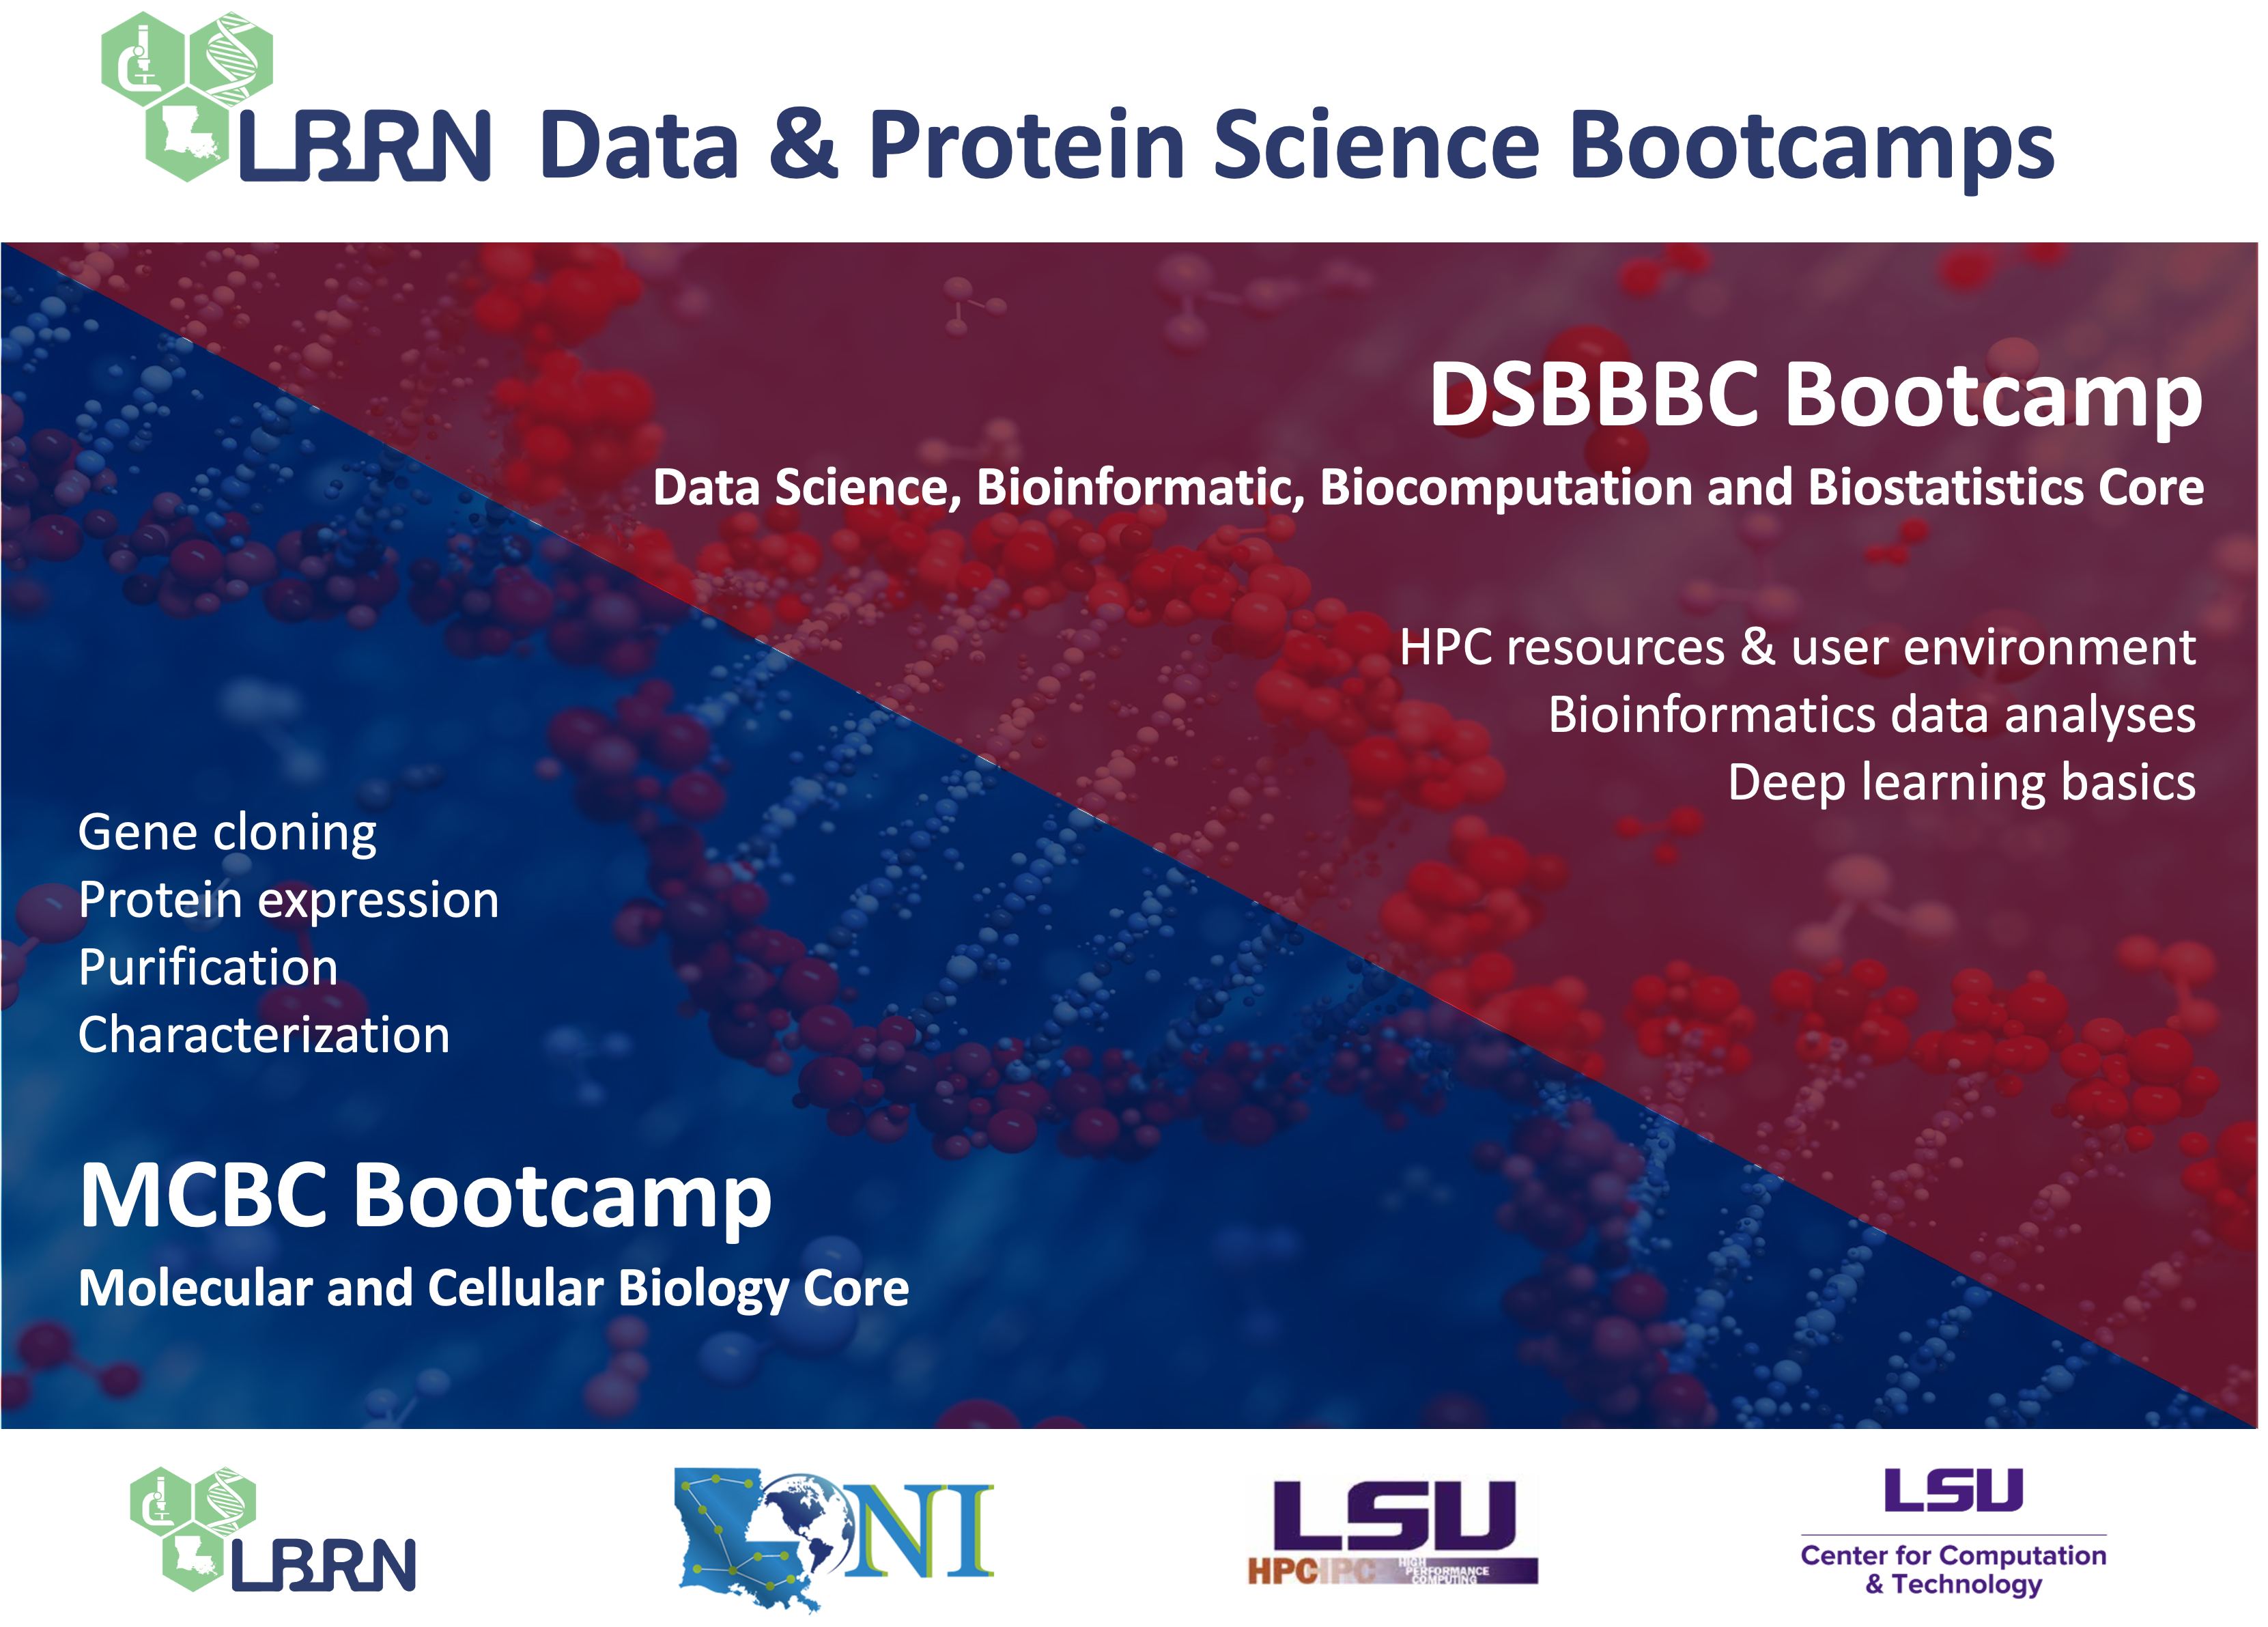 6th LBRN Data & Protein Science Bootcamps <p></p> DSBBBC & MCBC Bootcamp